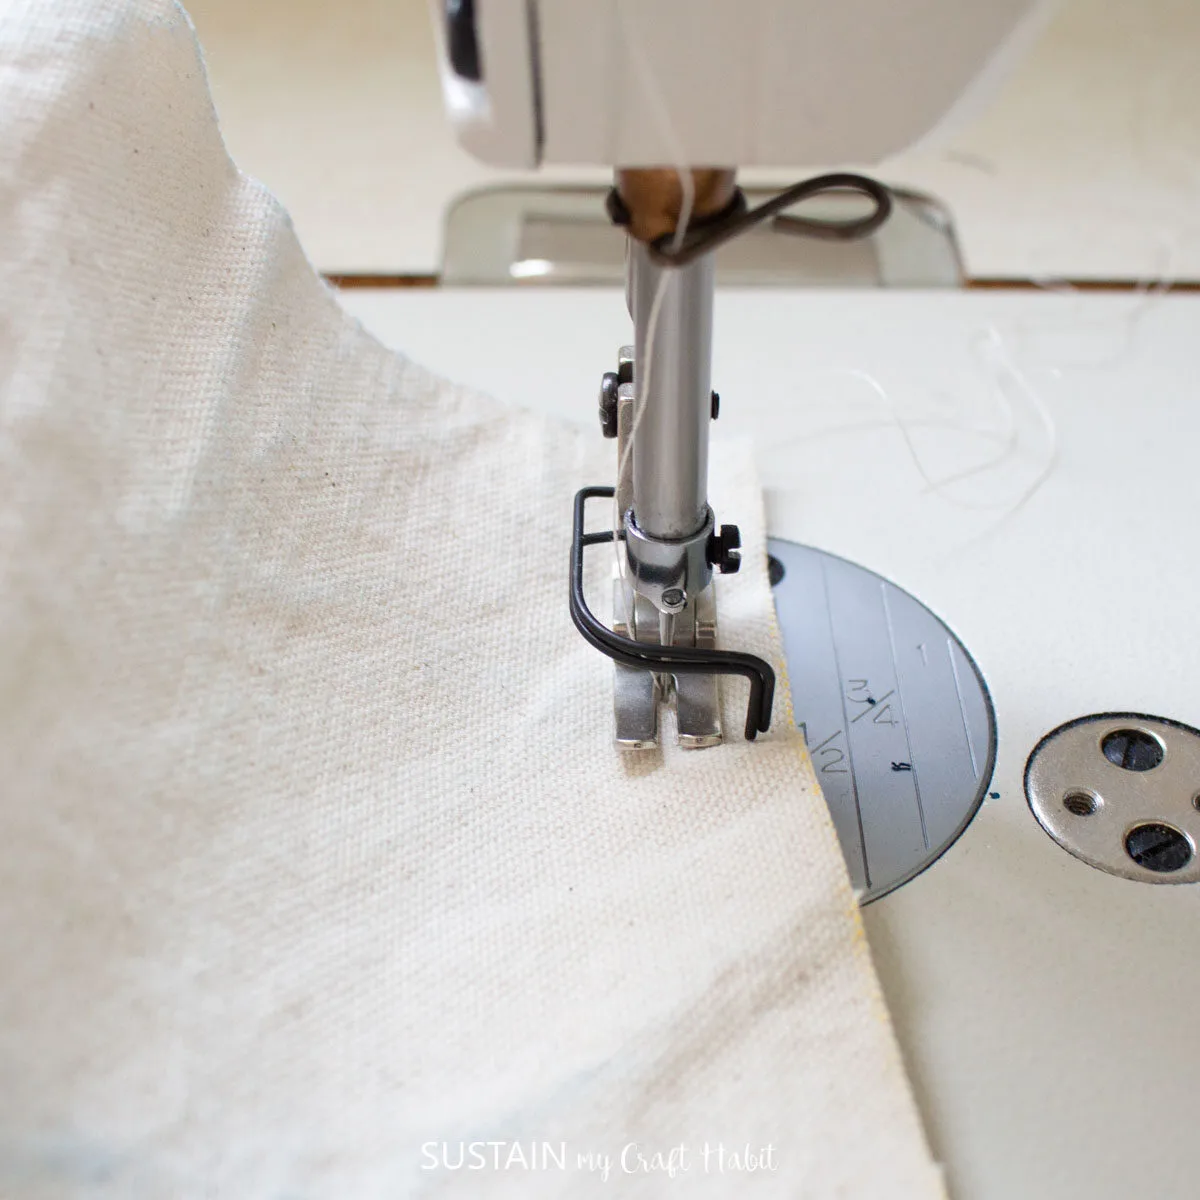 Sewing the zipper onto the canvas fabric.